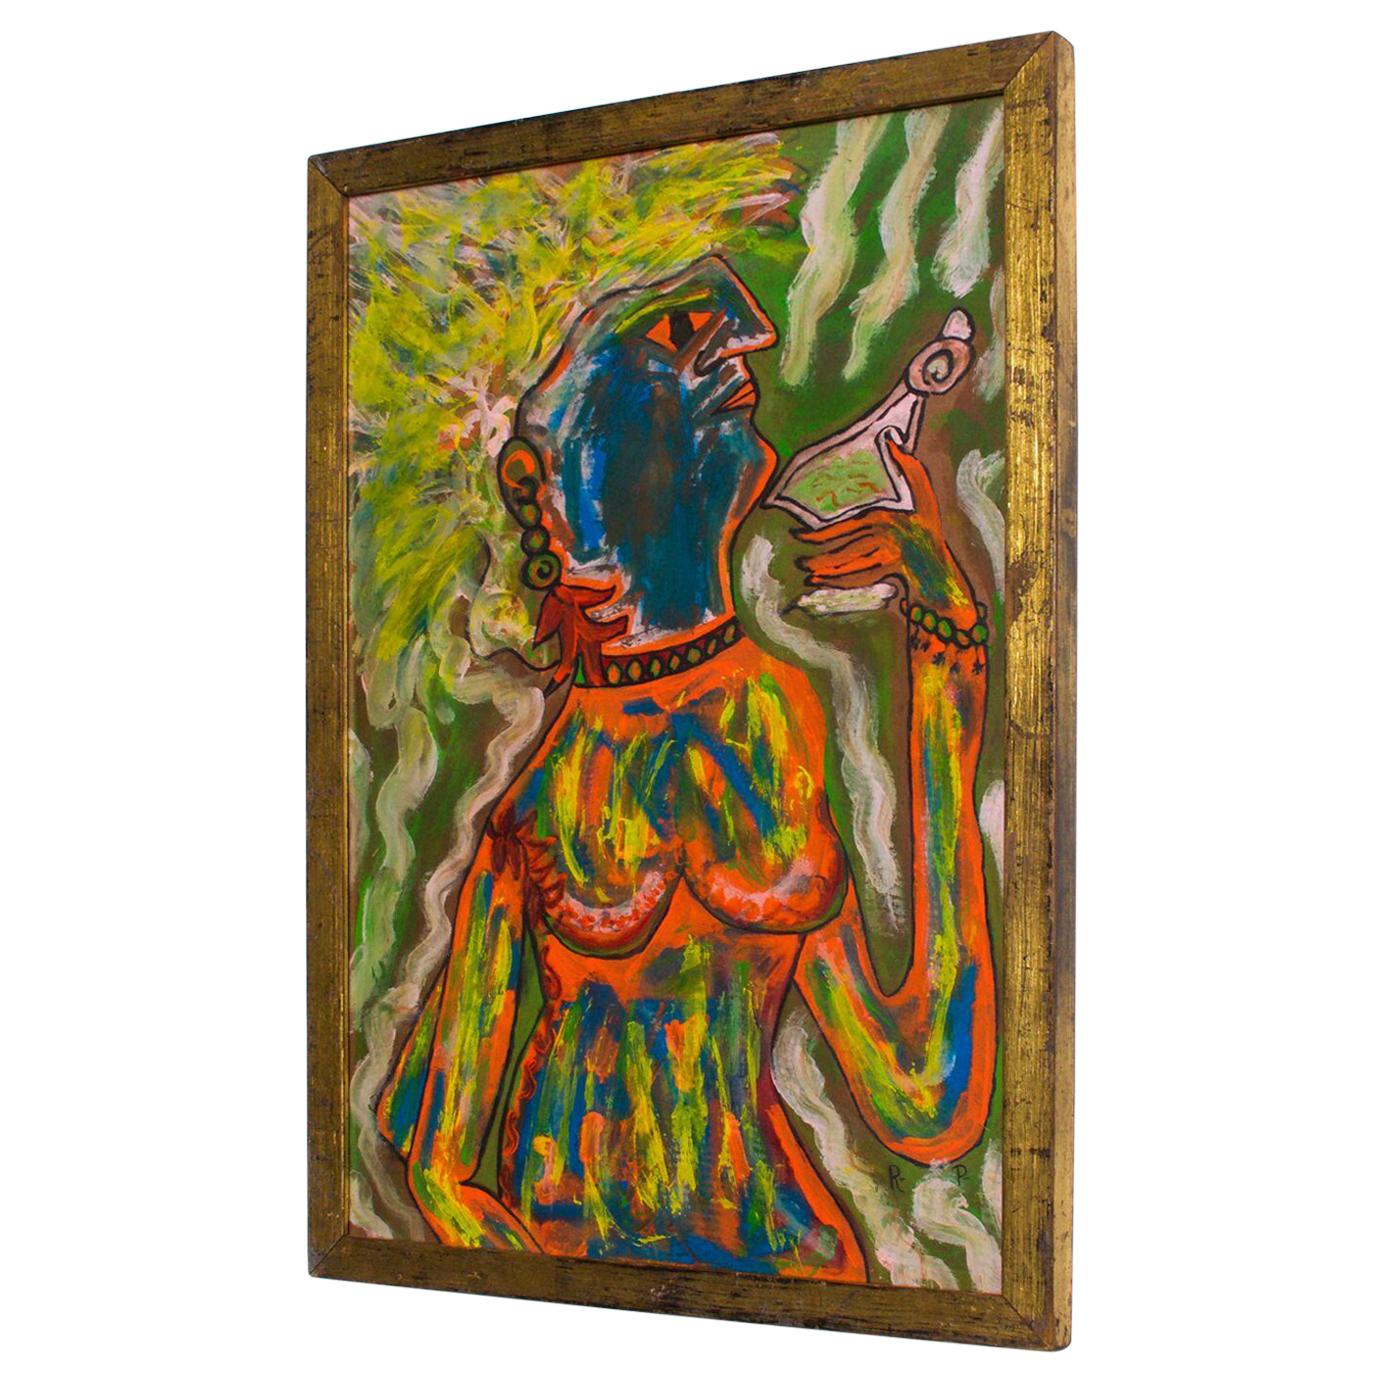 AMBIANIC presents
Colorful tribal still life print portrait Mexican art after Jean M Basquiat.
Signed with initials.
Label on backside.
Beautiful gold gilt frame.
16.75 W x 24 H x 1 D, 14.75 W x 22H
Original unrestored presentation vintage